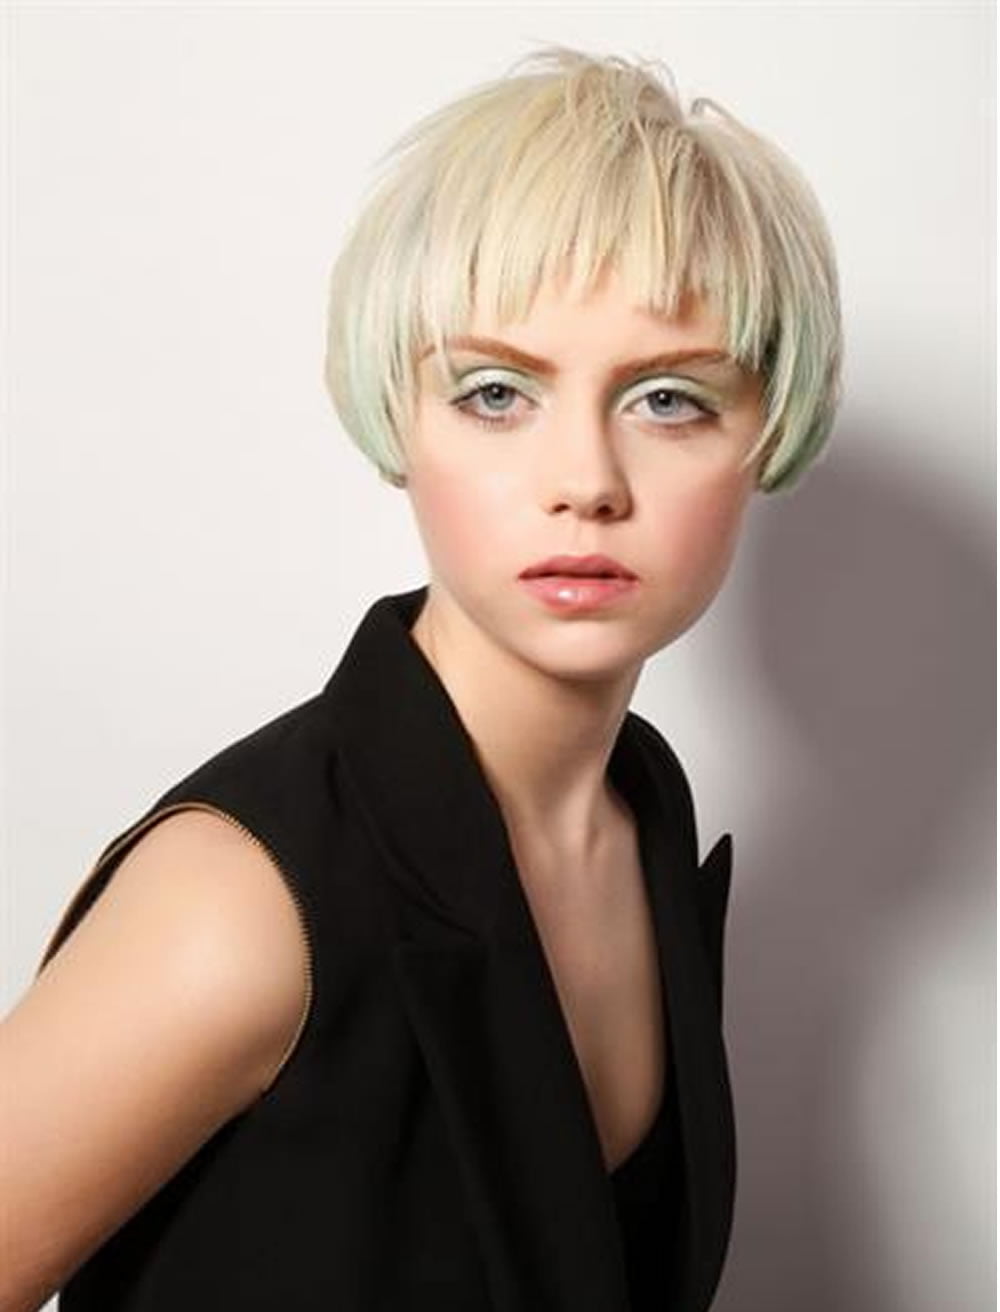 Best Best Short Bob Haircuts For Thin Hair for Rounded Face